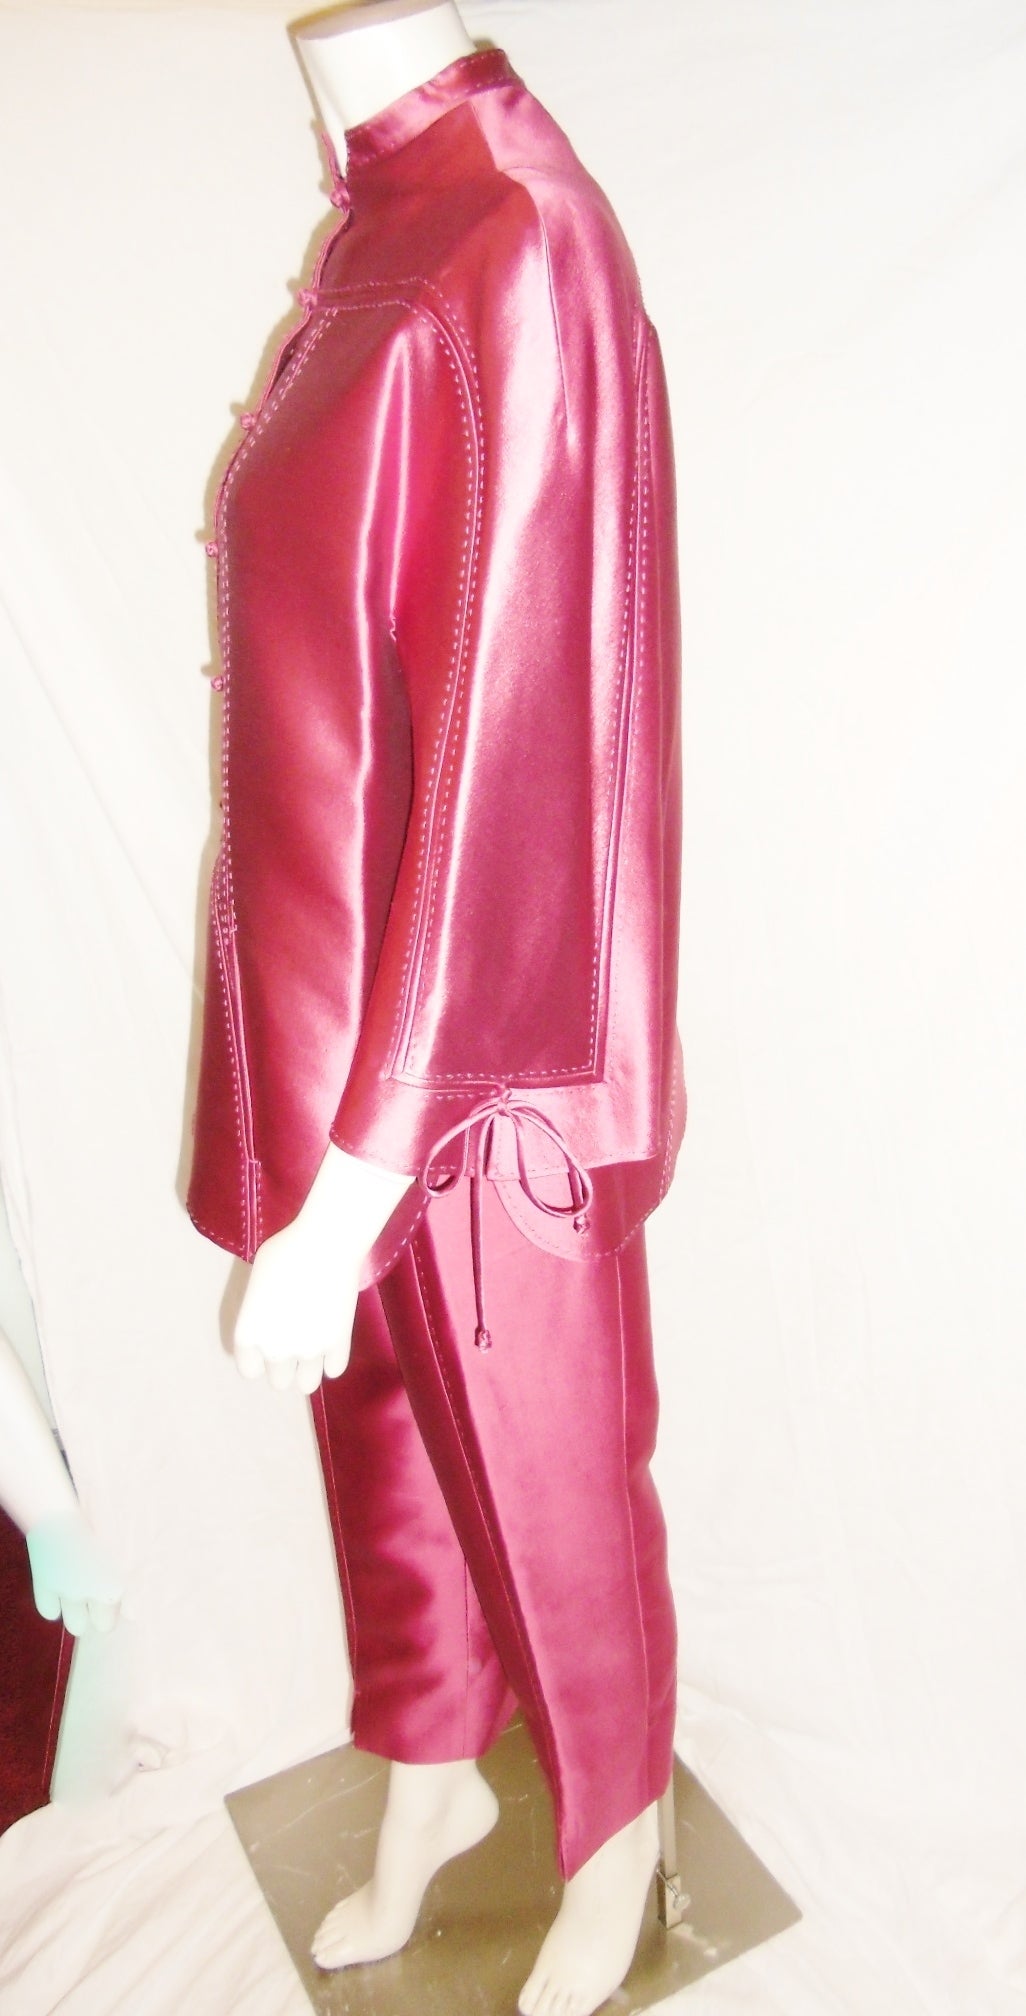 Pink Chado Ralph Rucci new Stunning evening pant suit sz 10 For Sale